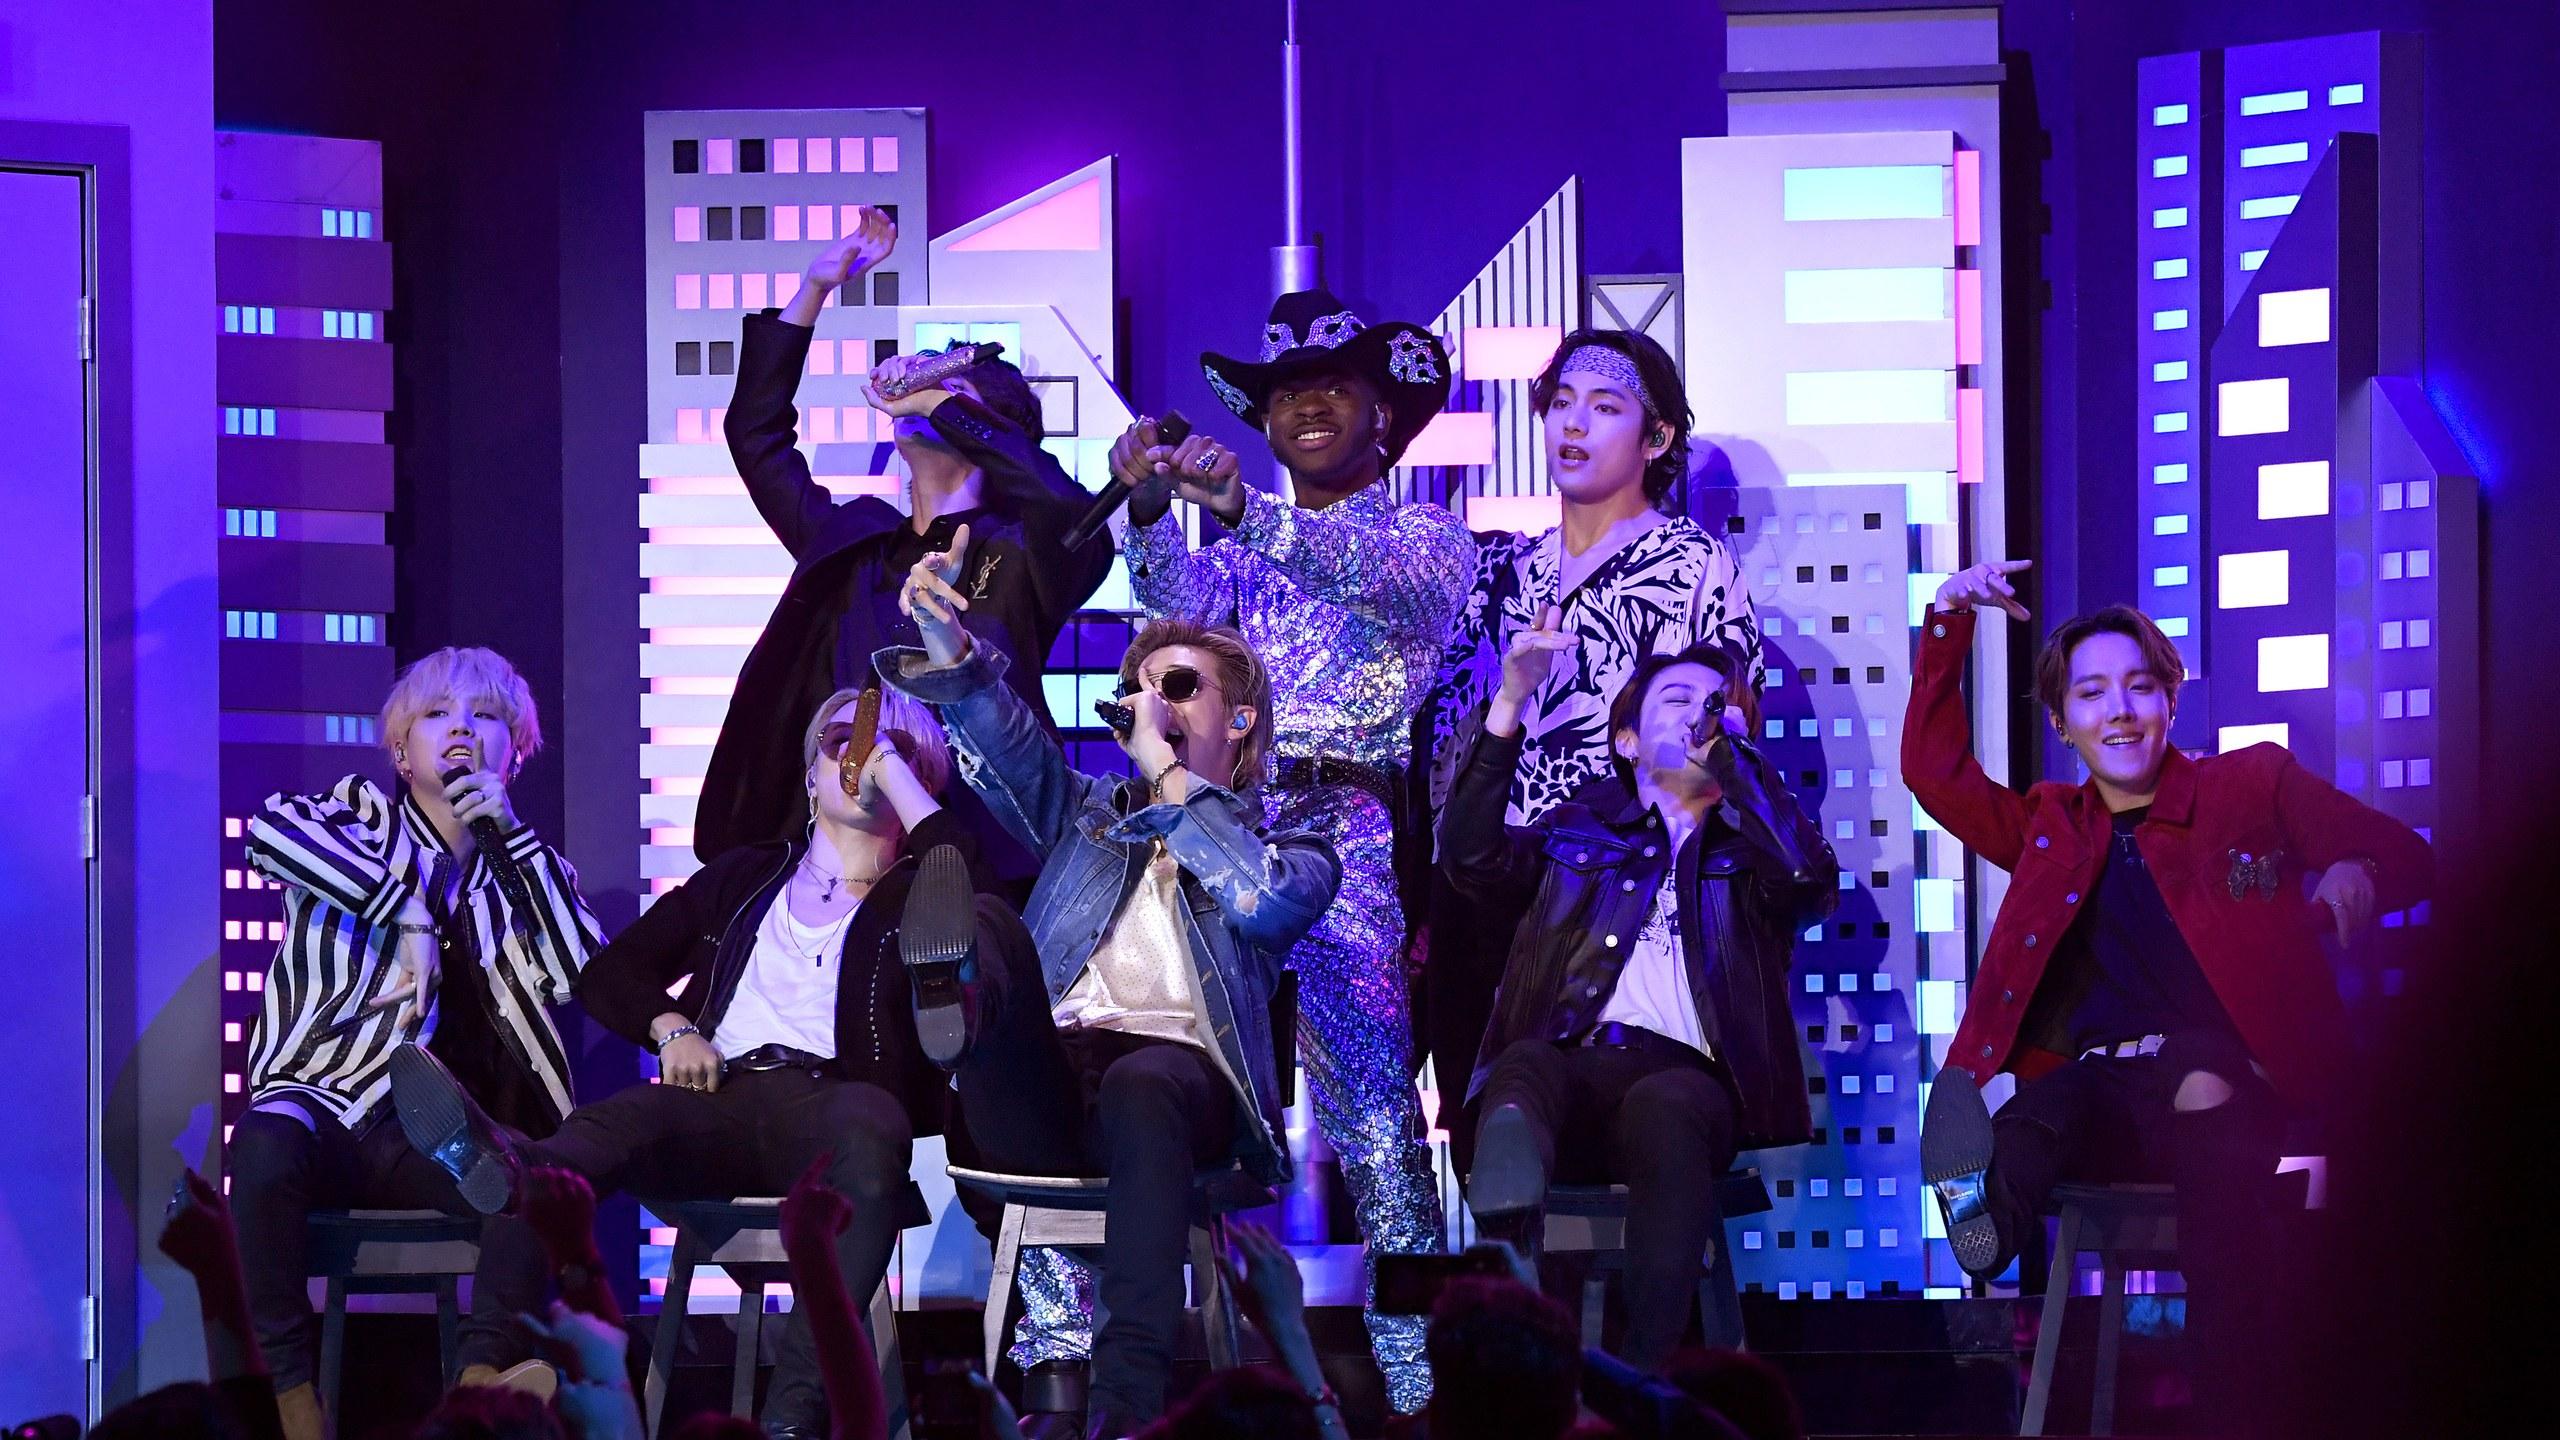 Lil Nas X, BTS, and More Performed “Old Town Road” at